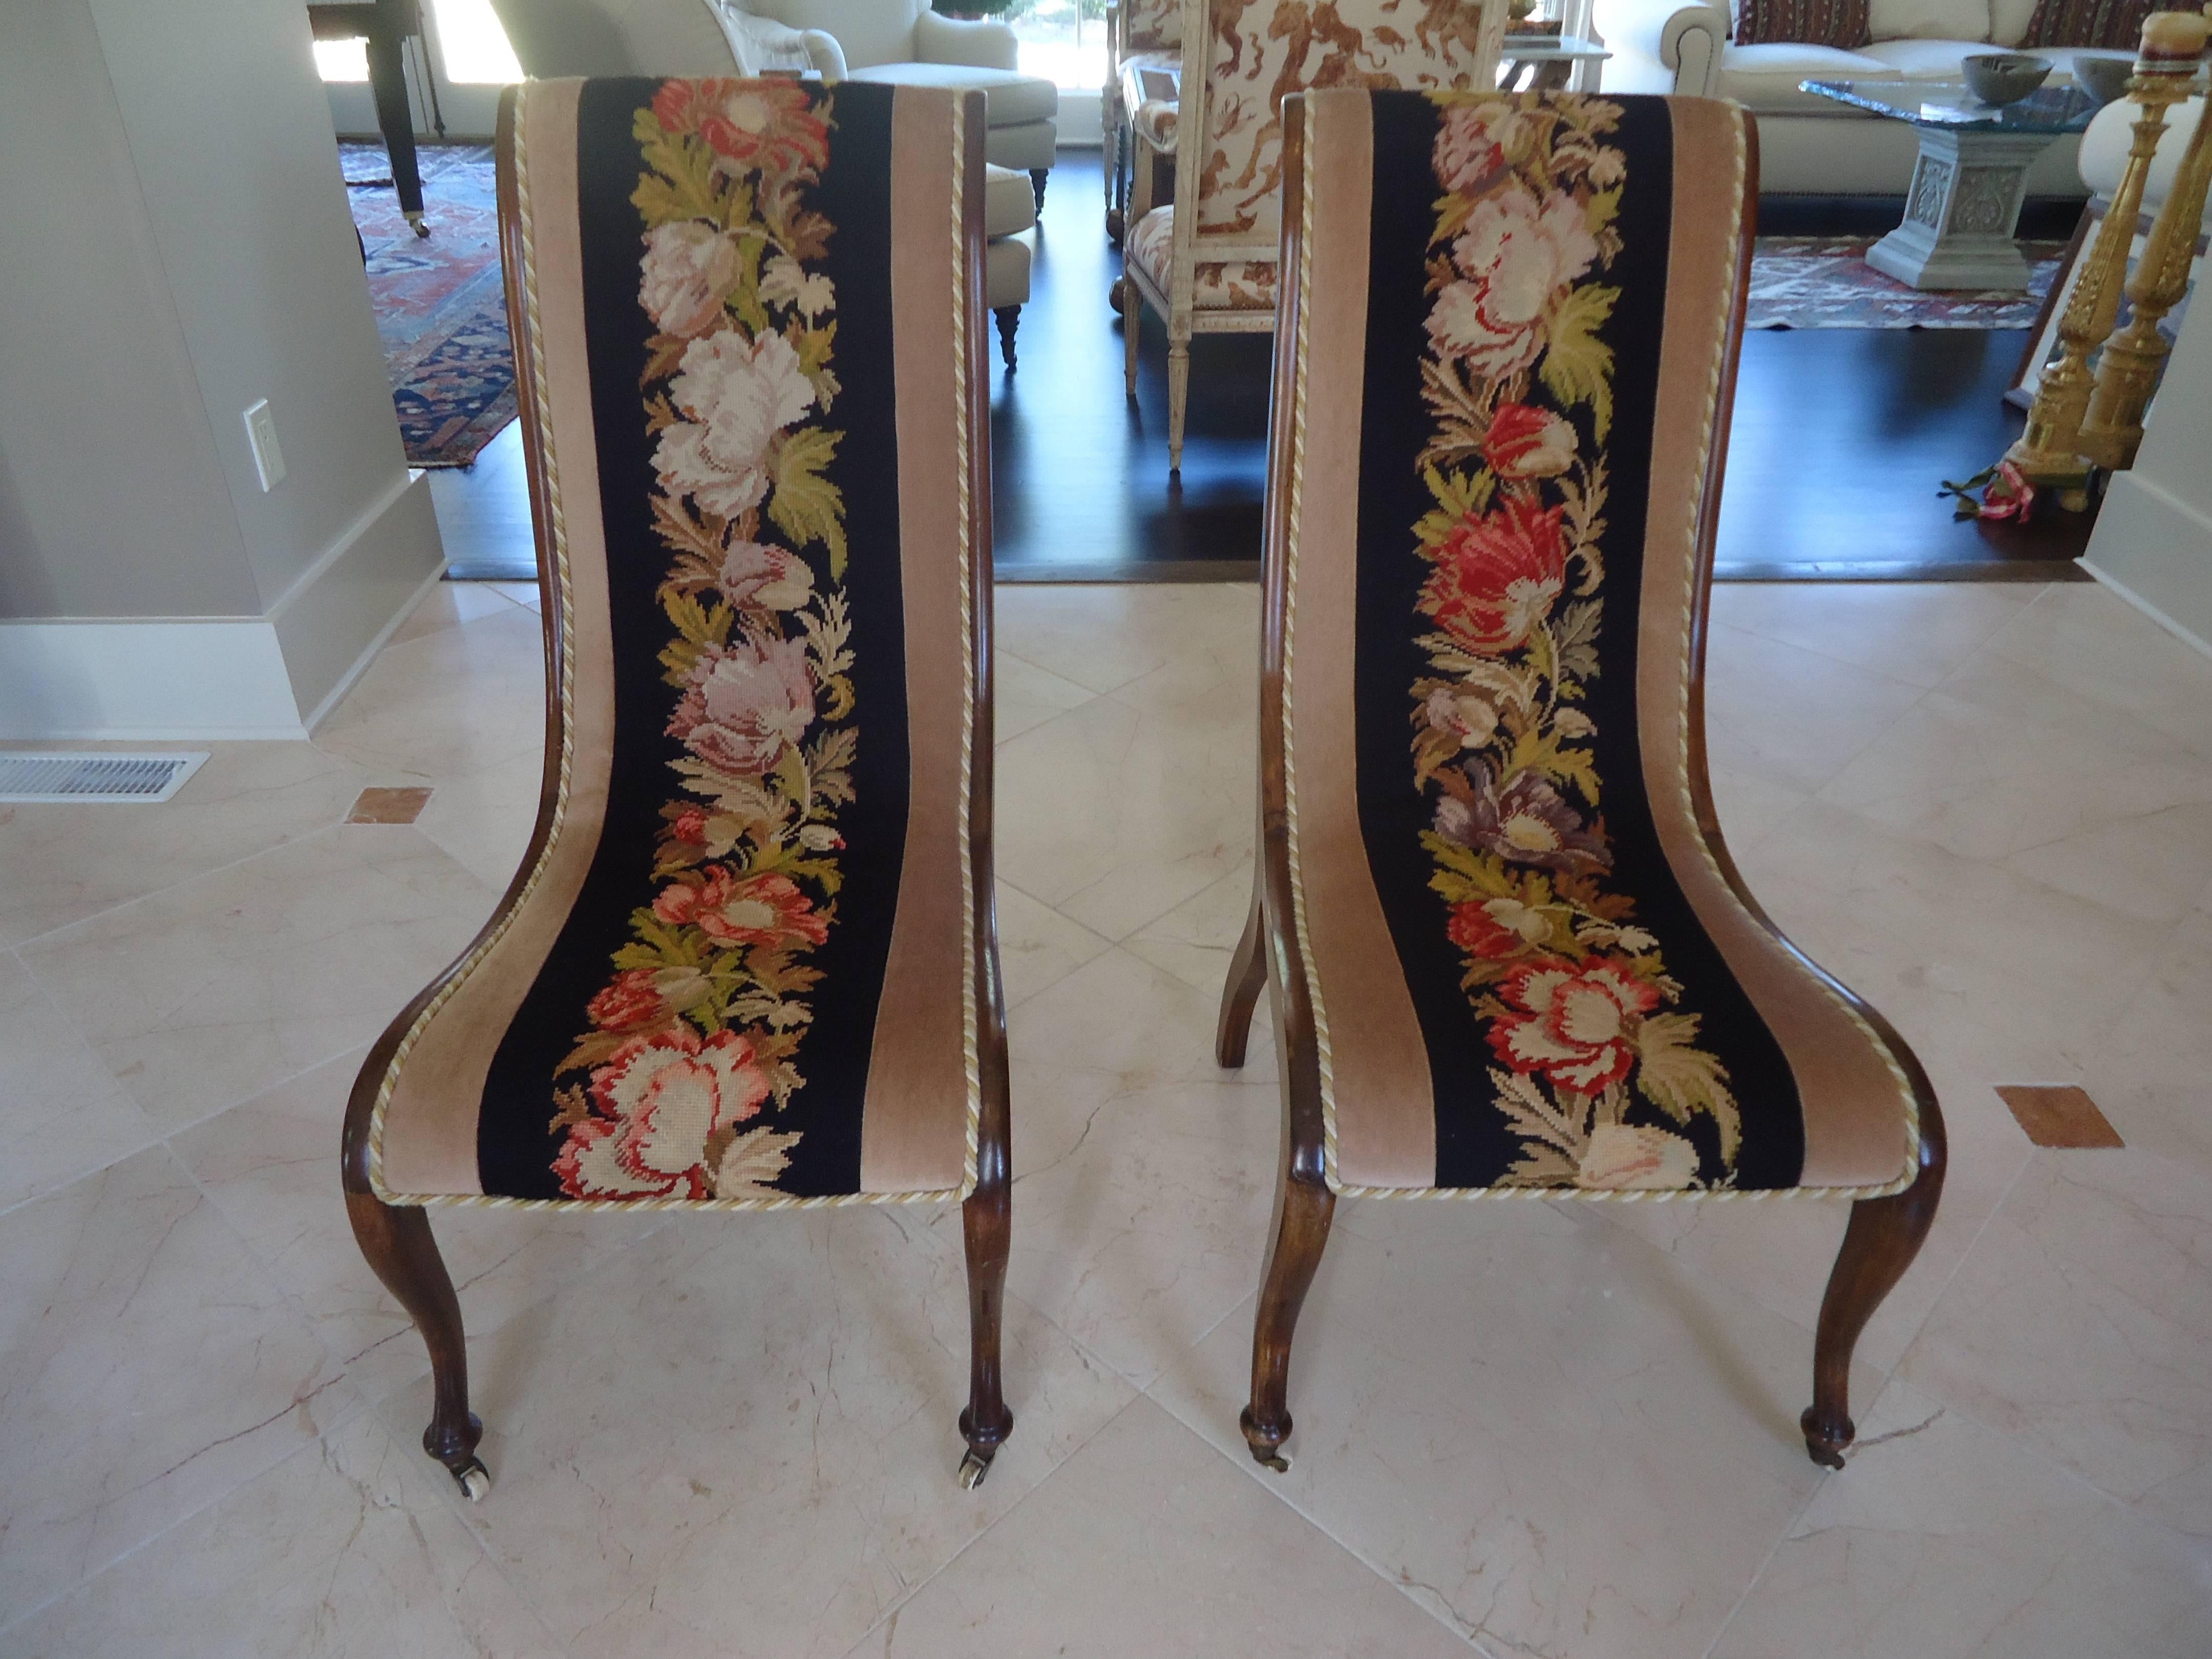 Elegant curved armless chairs with mahogany frames, original horsehair covered with needlepoint and velvet and decorative cording, lovely cabriole legs on casters.